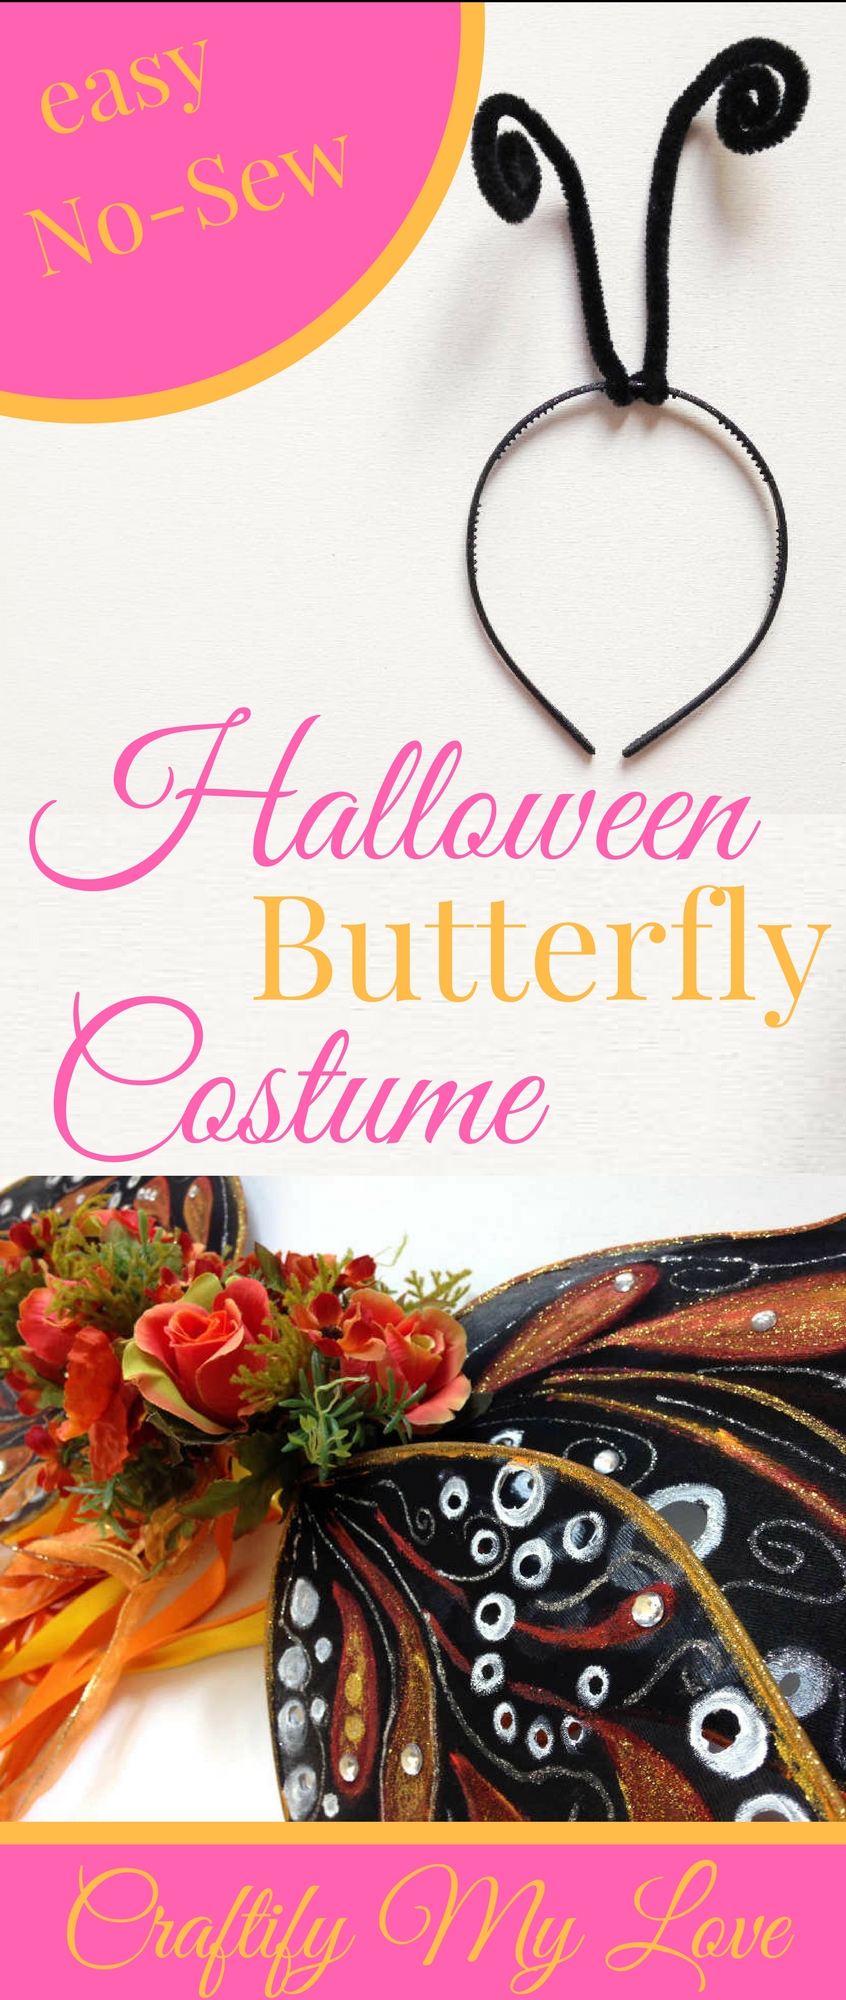 Easy no-sew butterfly costume including antennae for carnival. Learn how to make it. Click now!